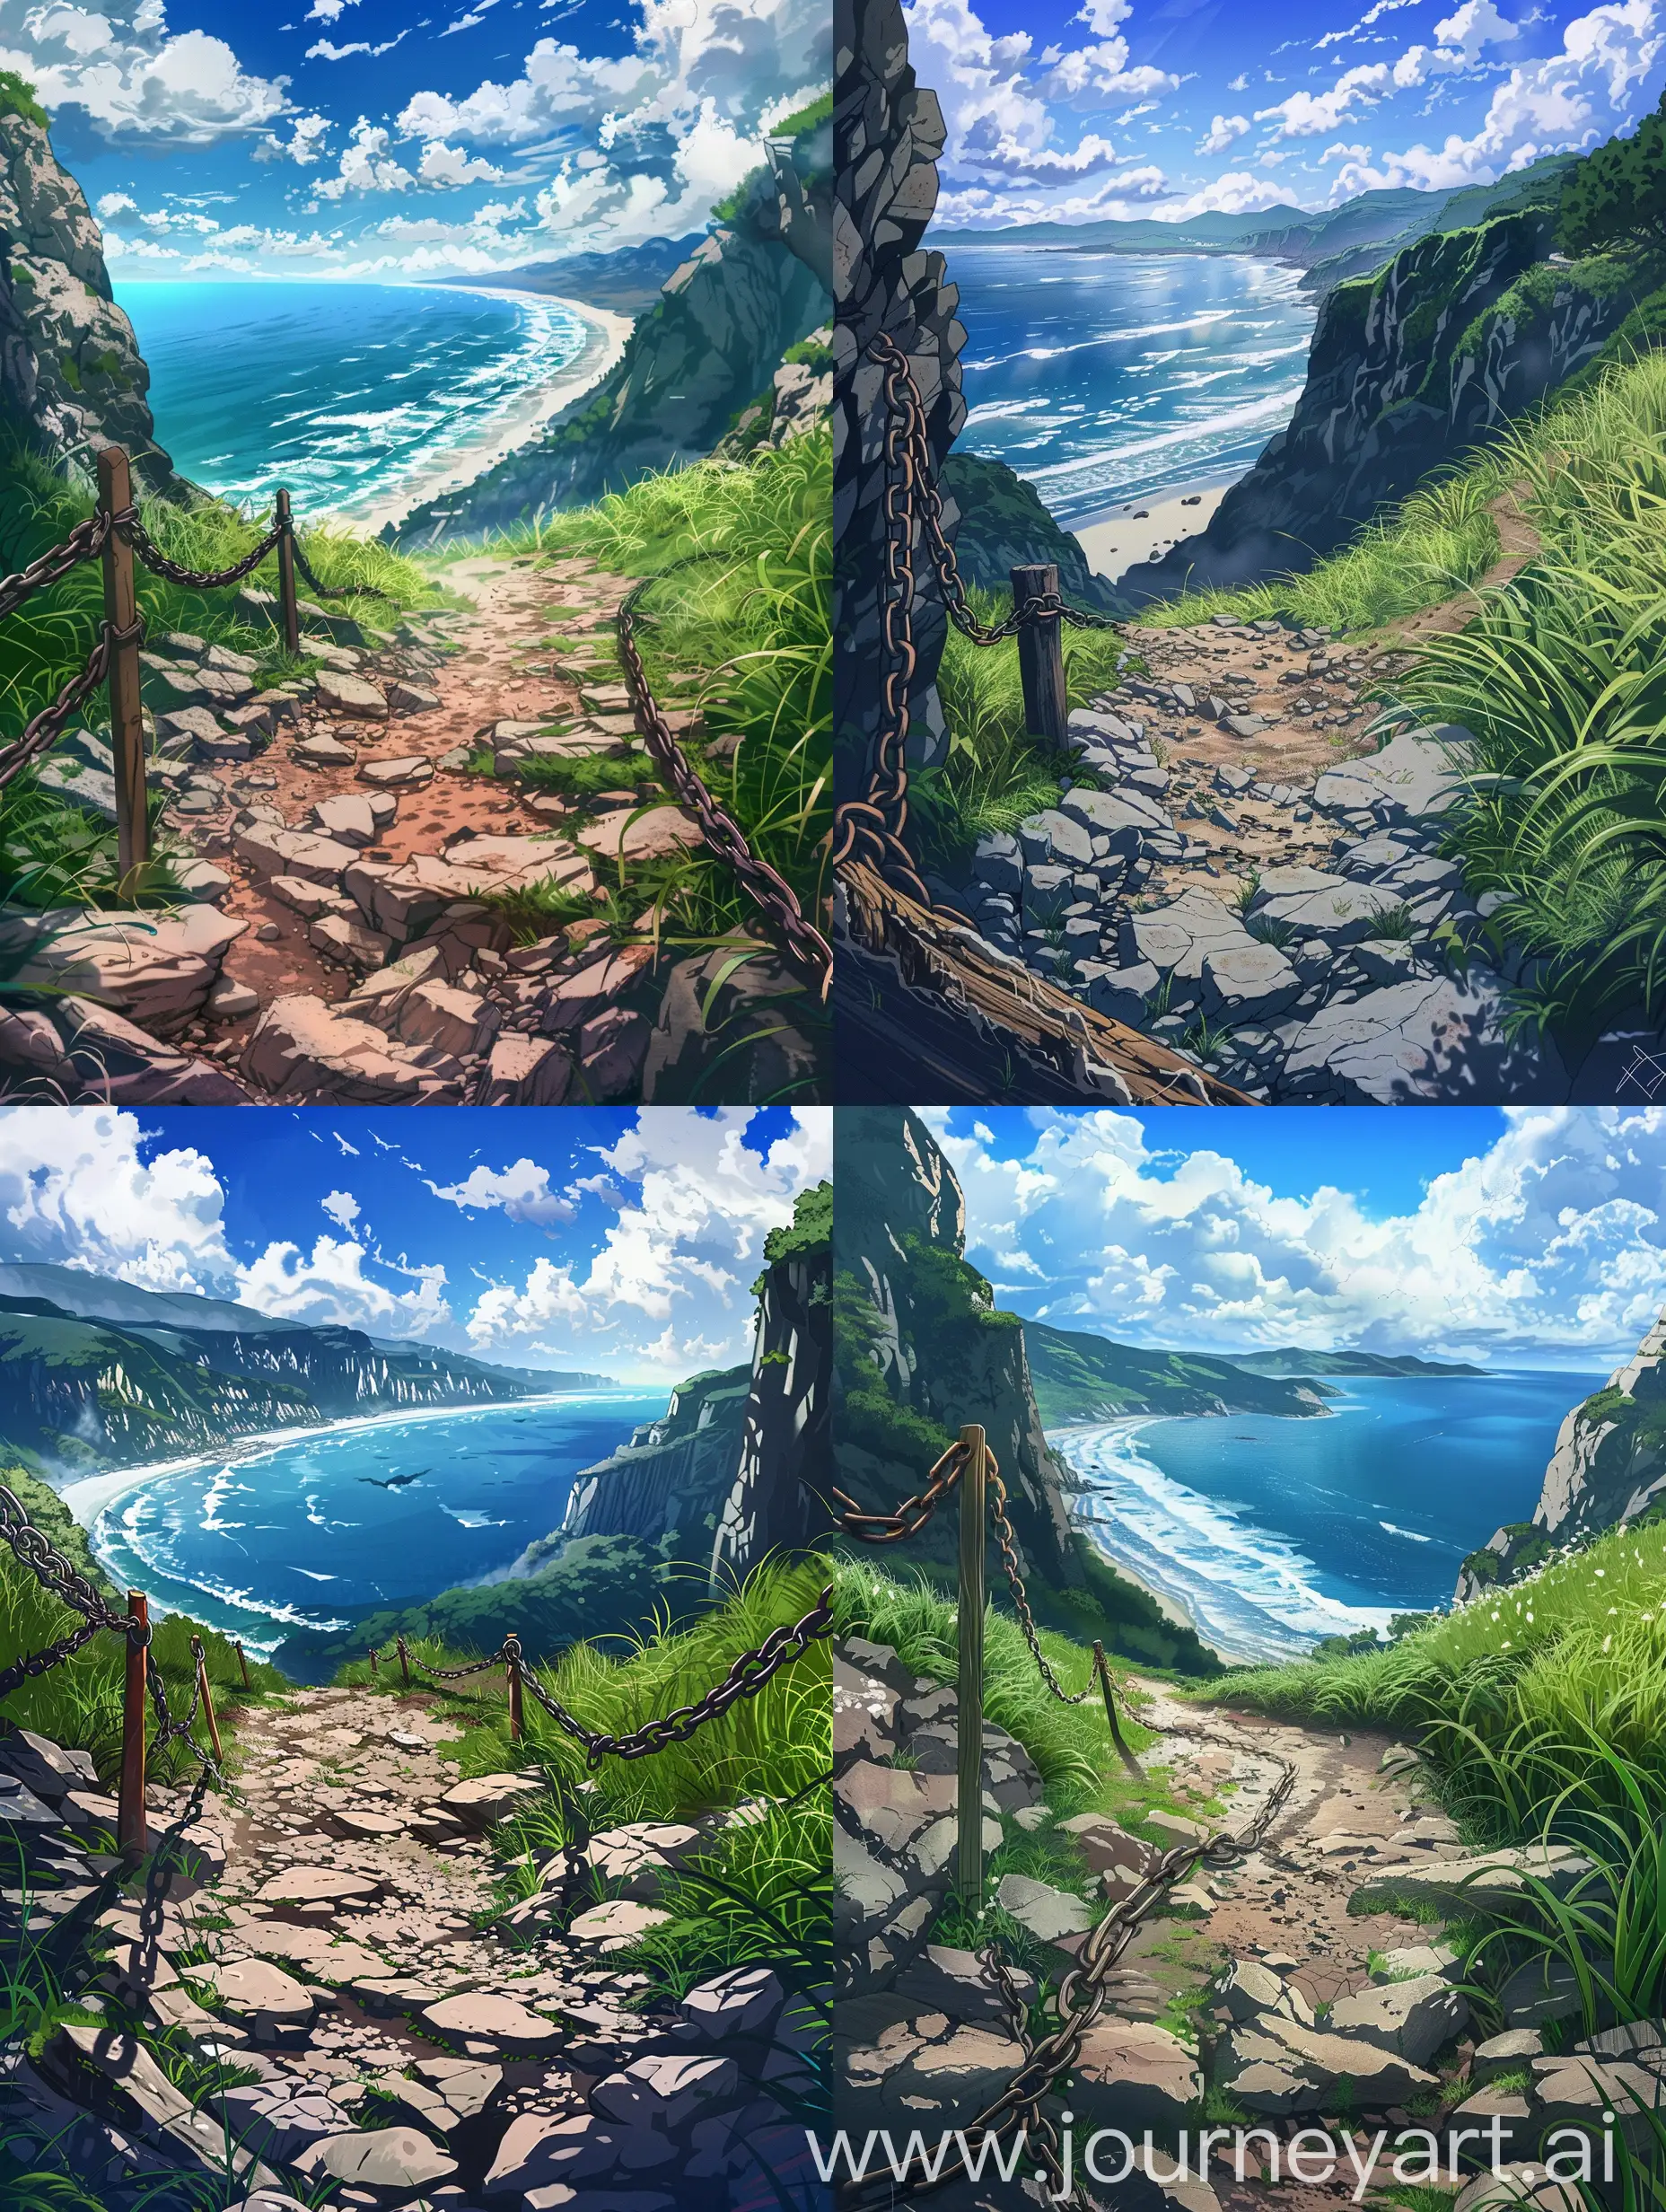 Anime style, difficult rocky road in the mountains next to the beach.  From the rocky road surrounded by grass to the right and left, you can see the beach below, the waves, and the blue sky filled with white clouds.  The rocky road has an iron chain next to it tied to wood so that no one falls.